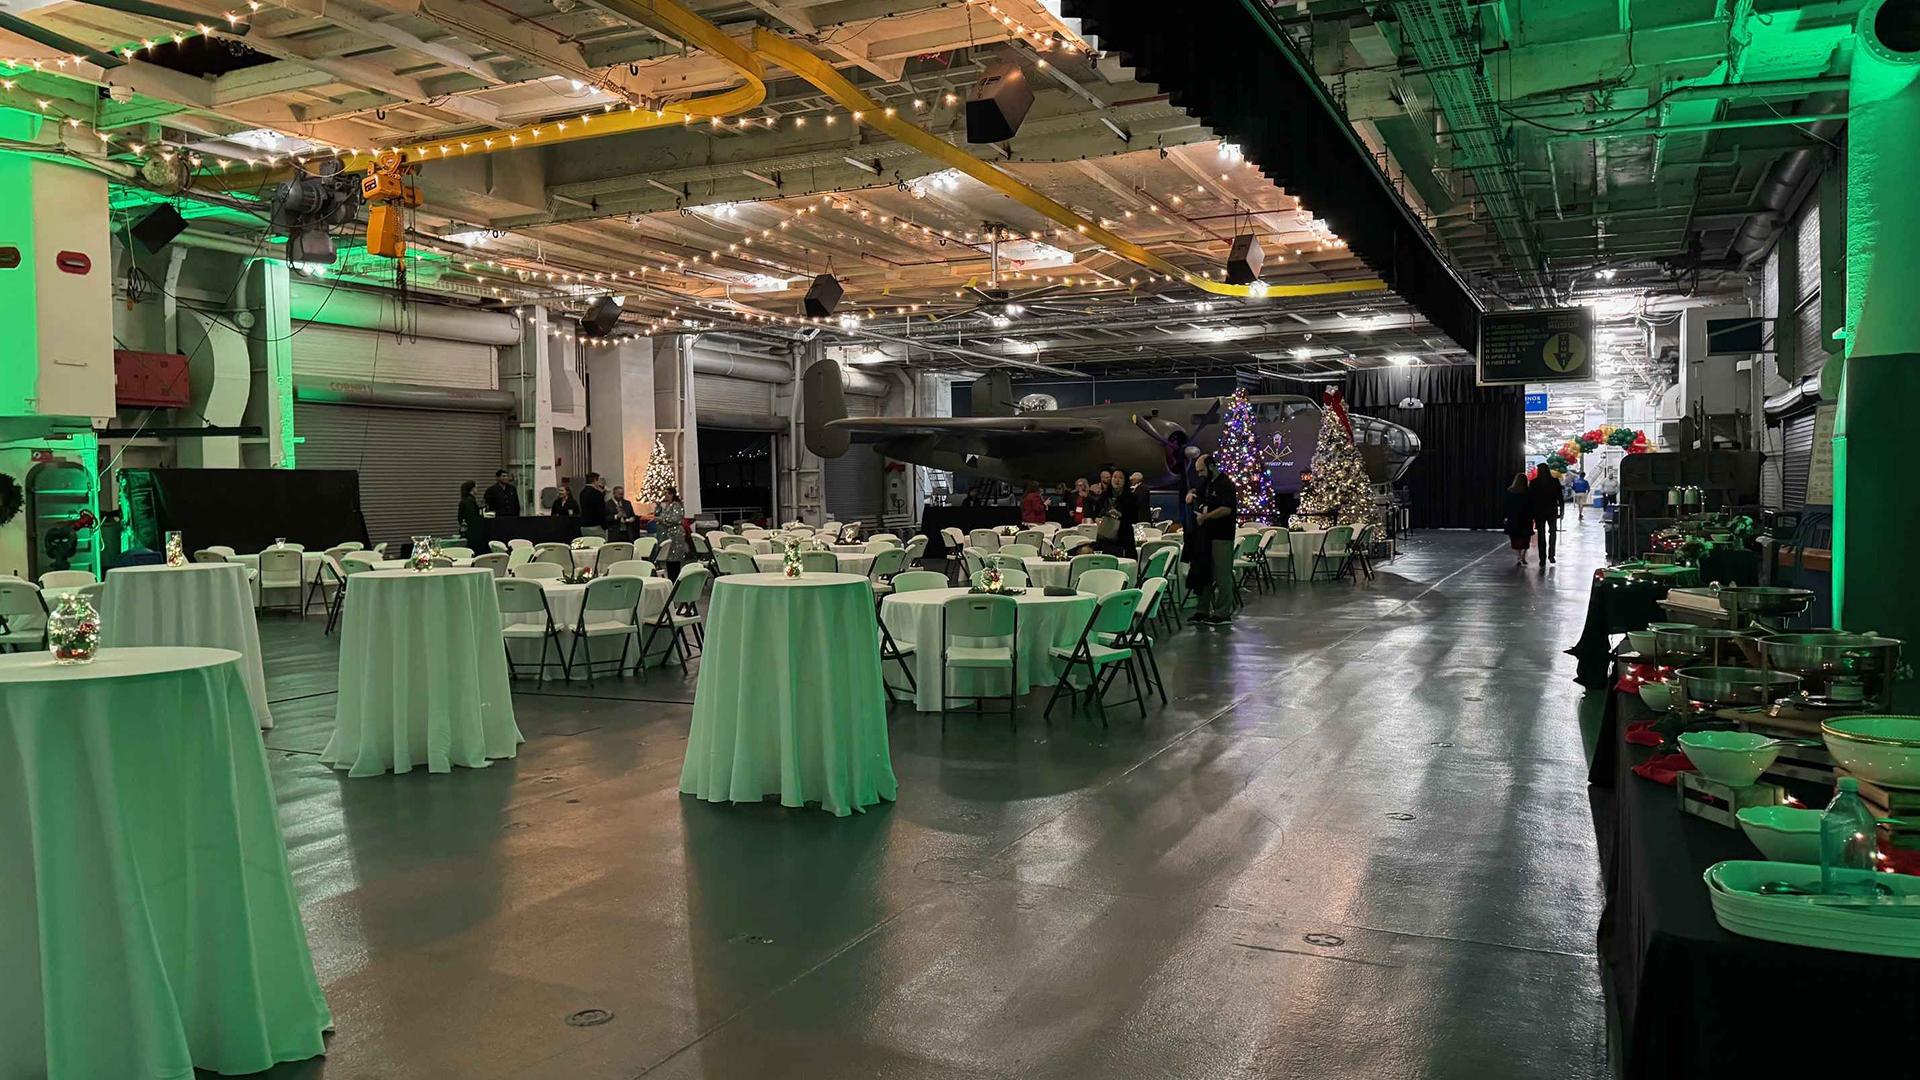 Round tables, standing tables and a buffet set up in the Hangar Bay